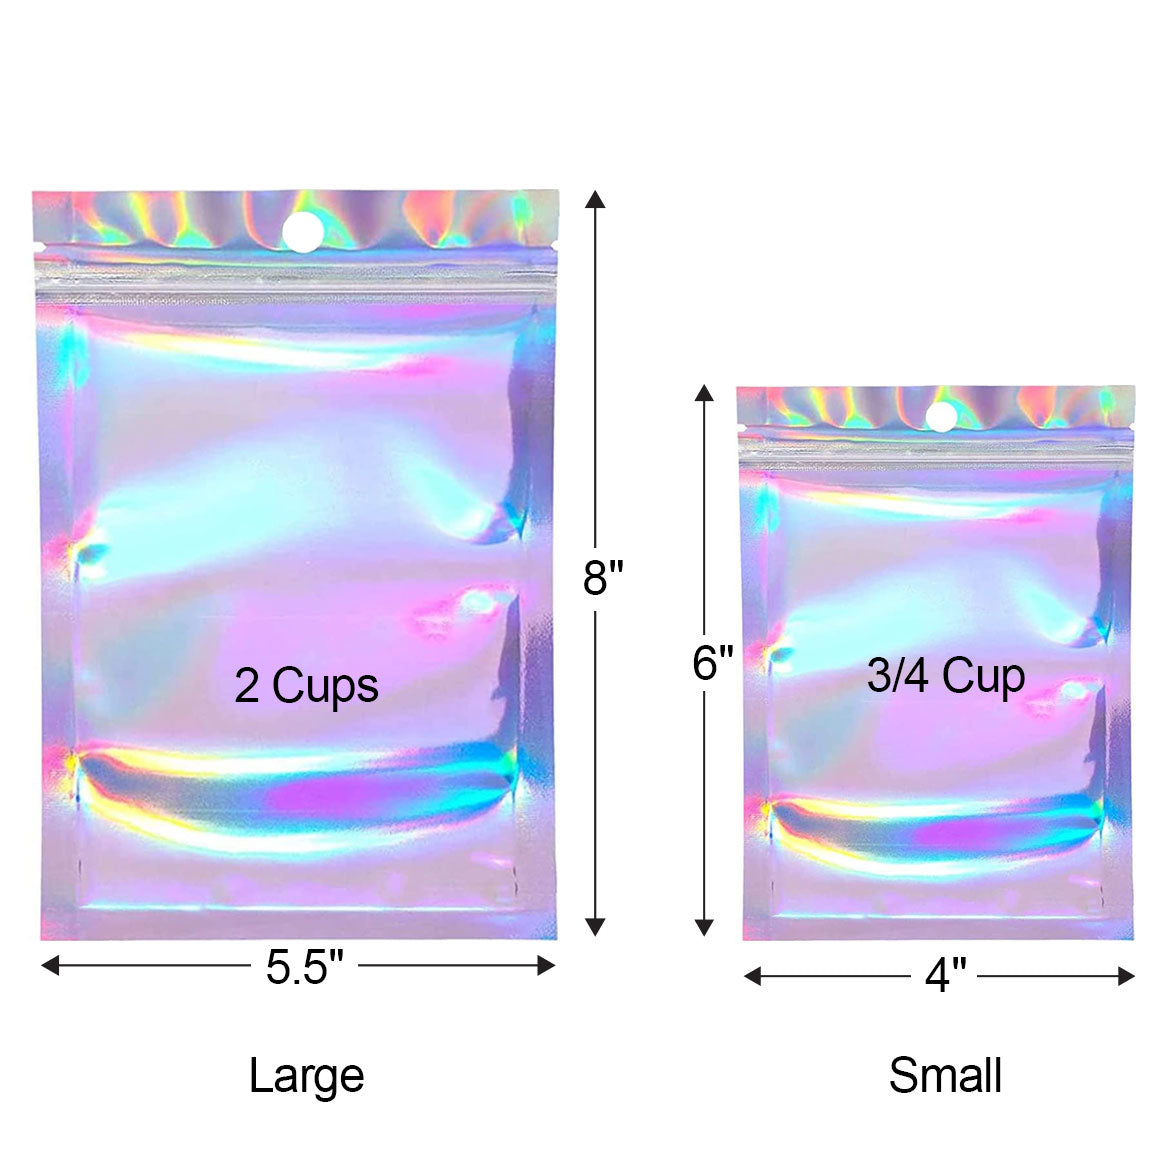 Freeze-Dried Candy Bag Dimensions